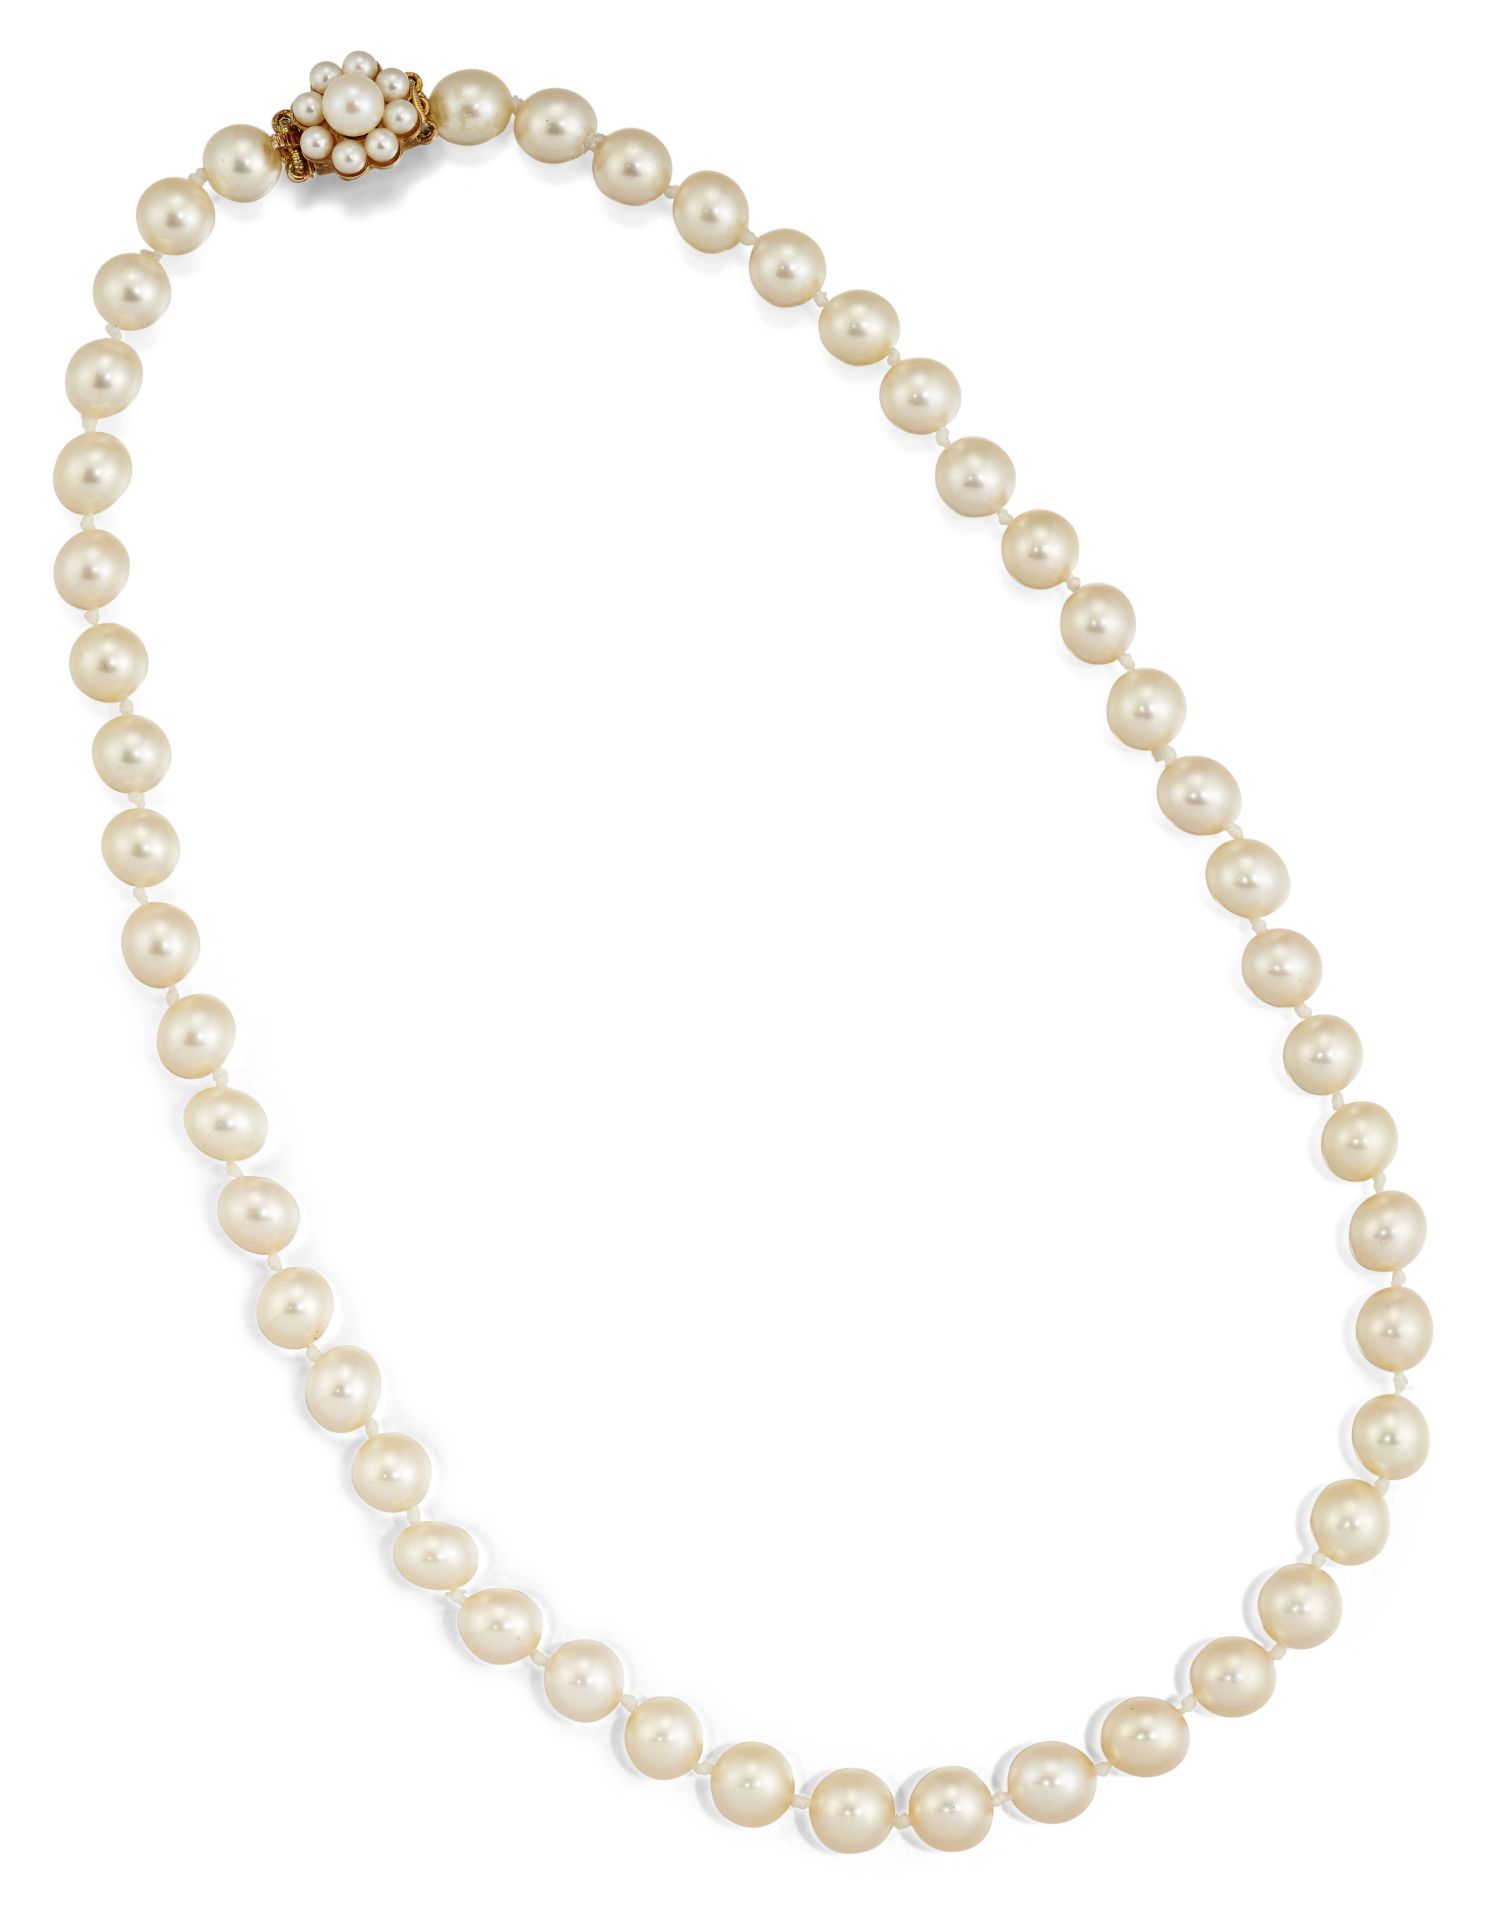 A 9CT CULTURED PEARL NECKLACE,